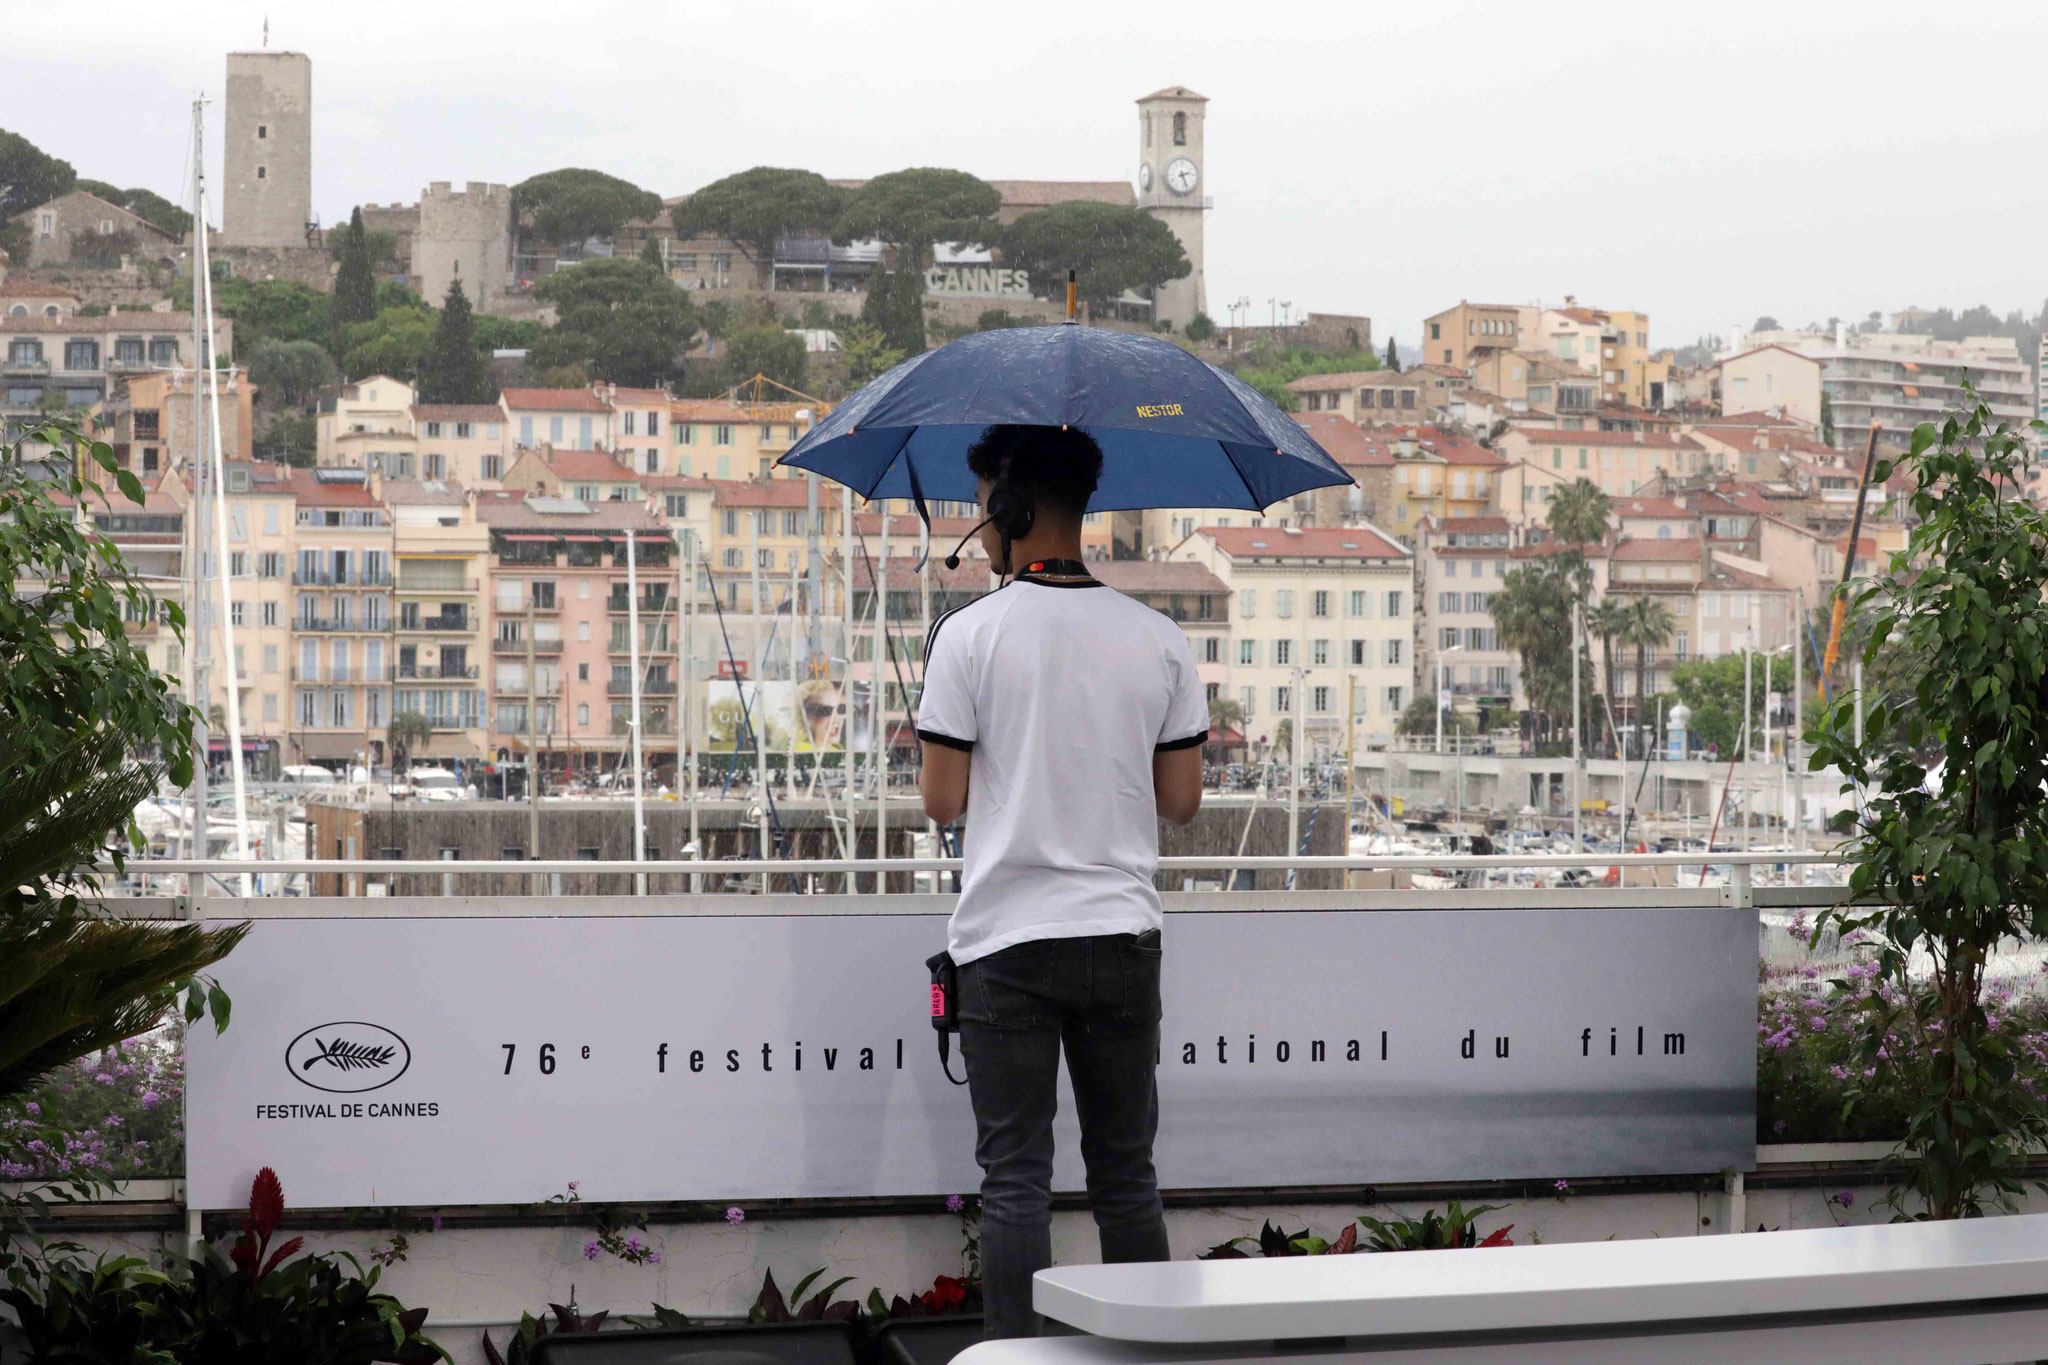 It's pouring rain in Cannes.